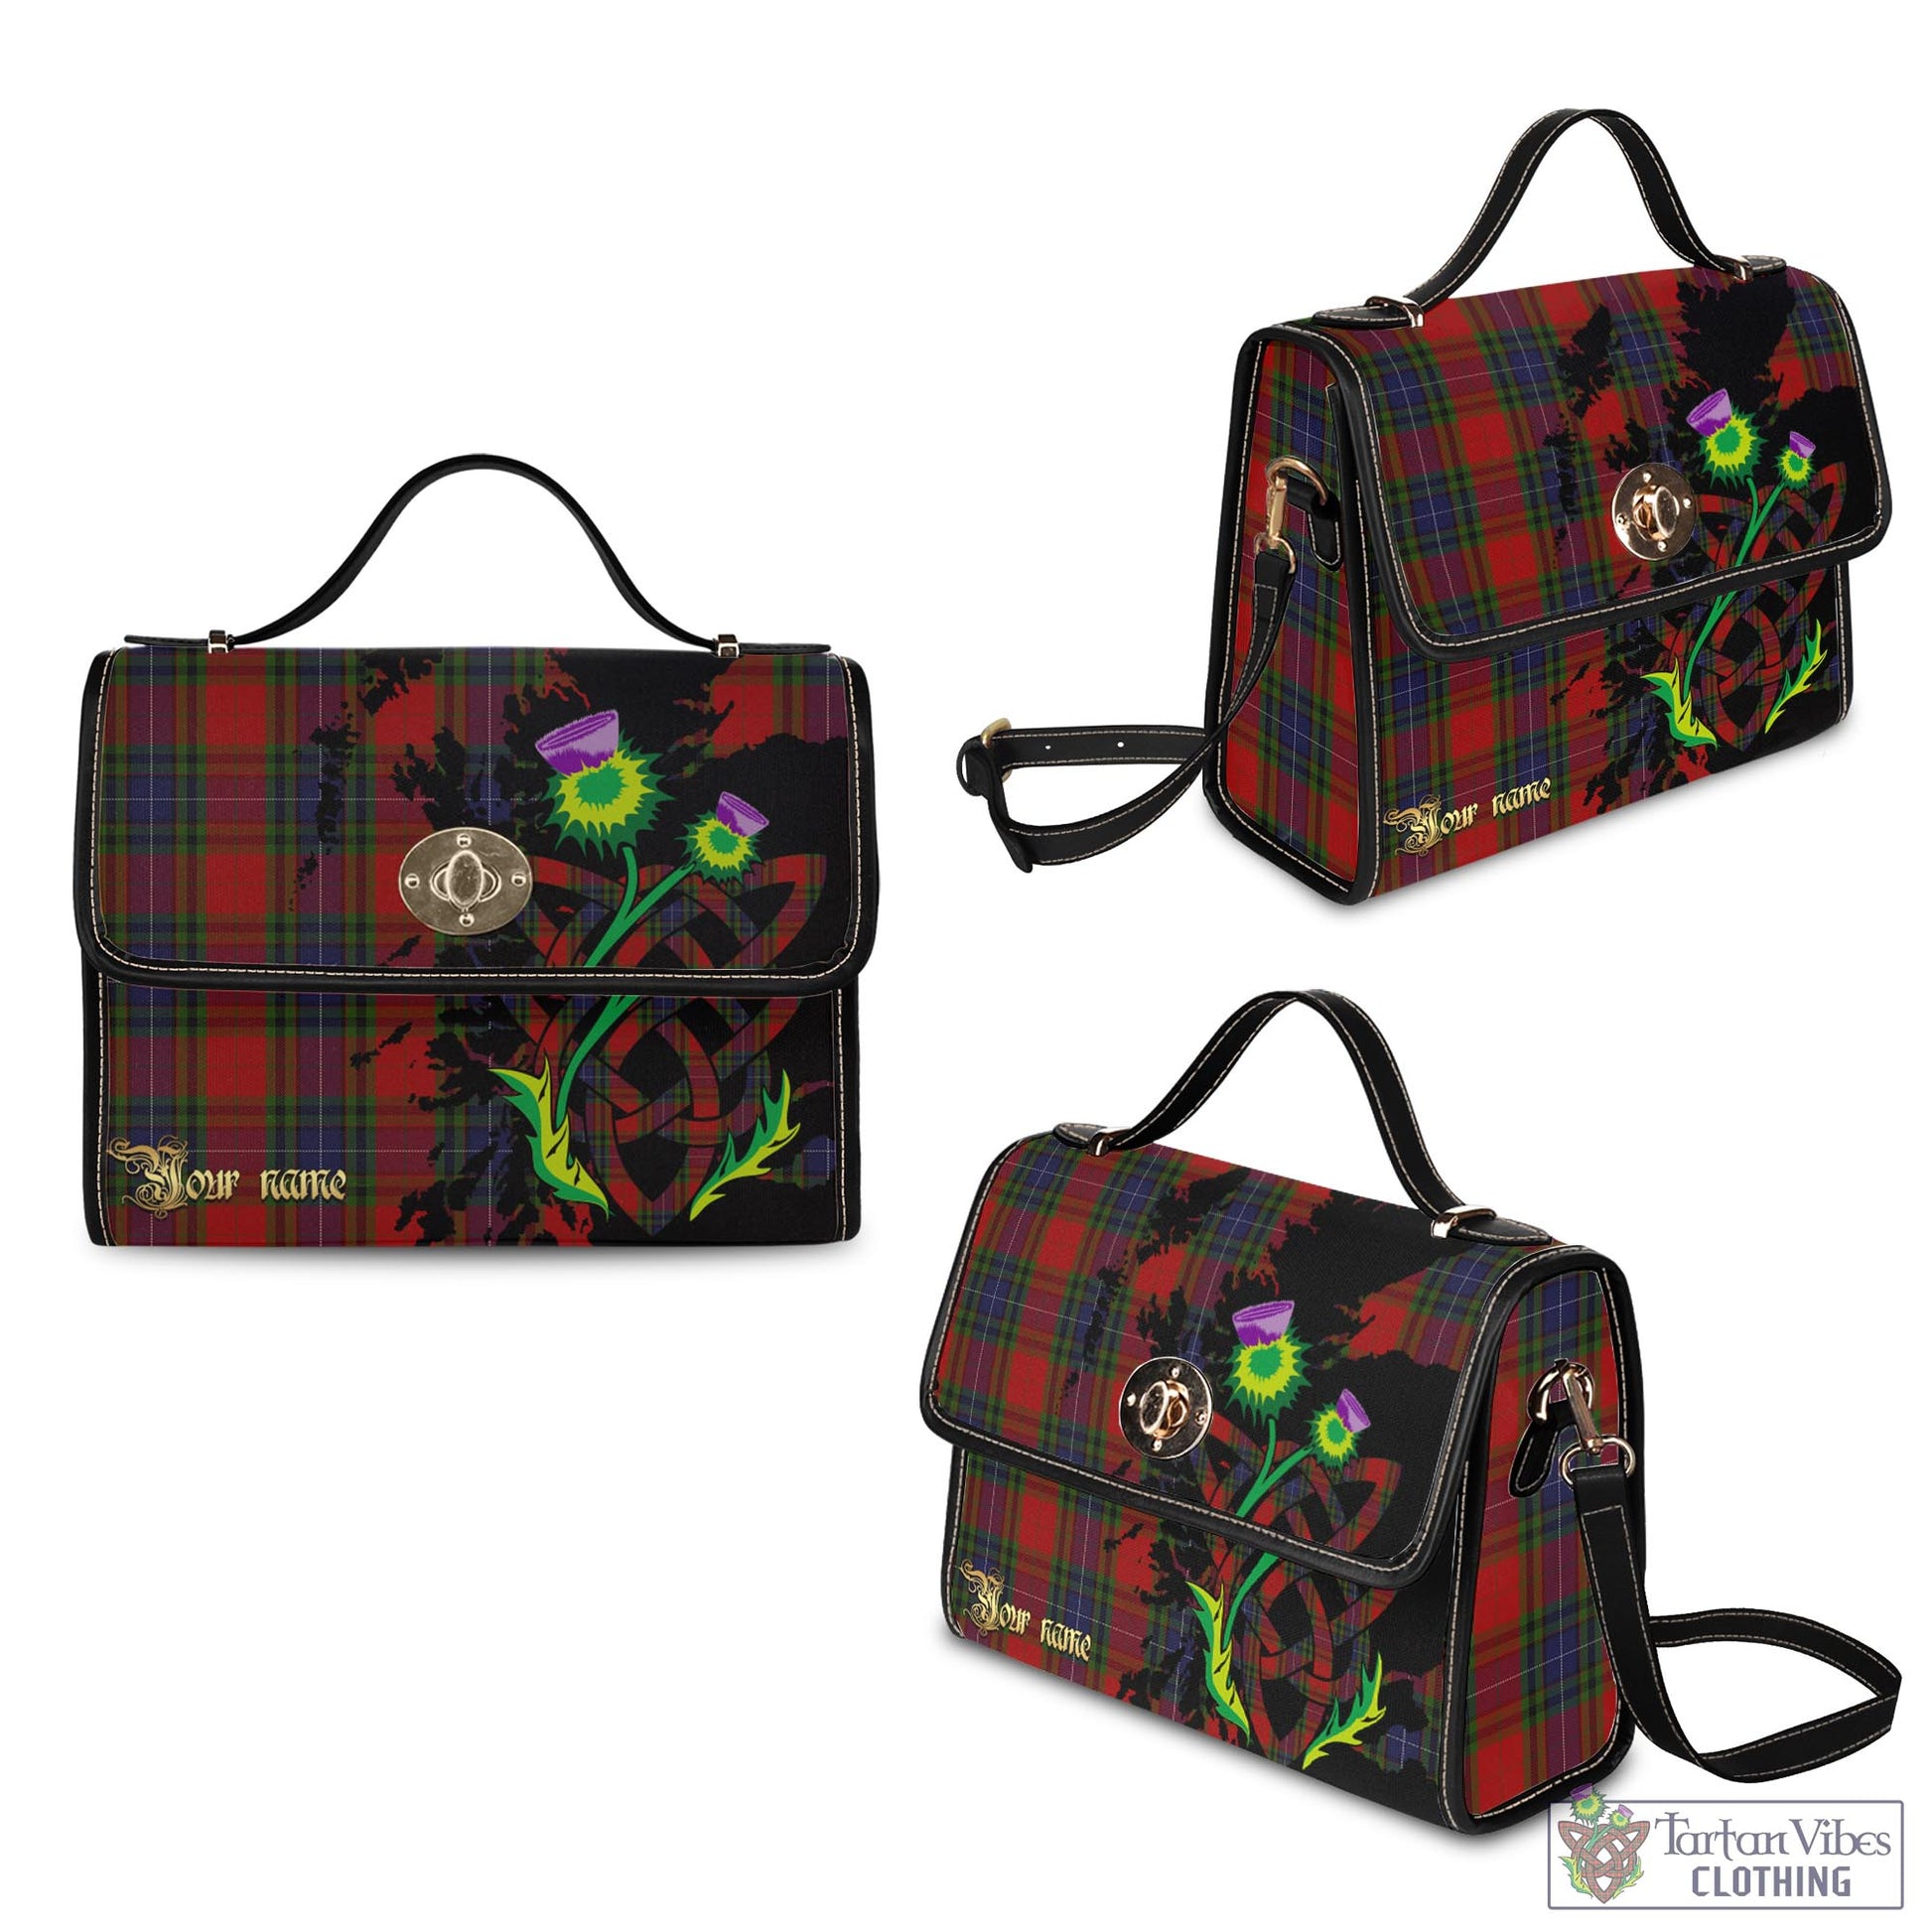 Tartan Vibes Clothing Manson Tartan Waterproof Canvas Bag with Scotland Map and Thistle Celtic Accents